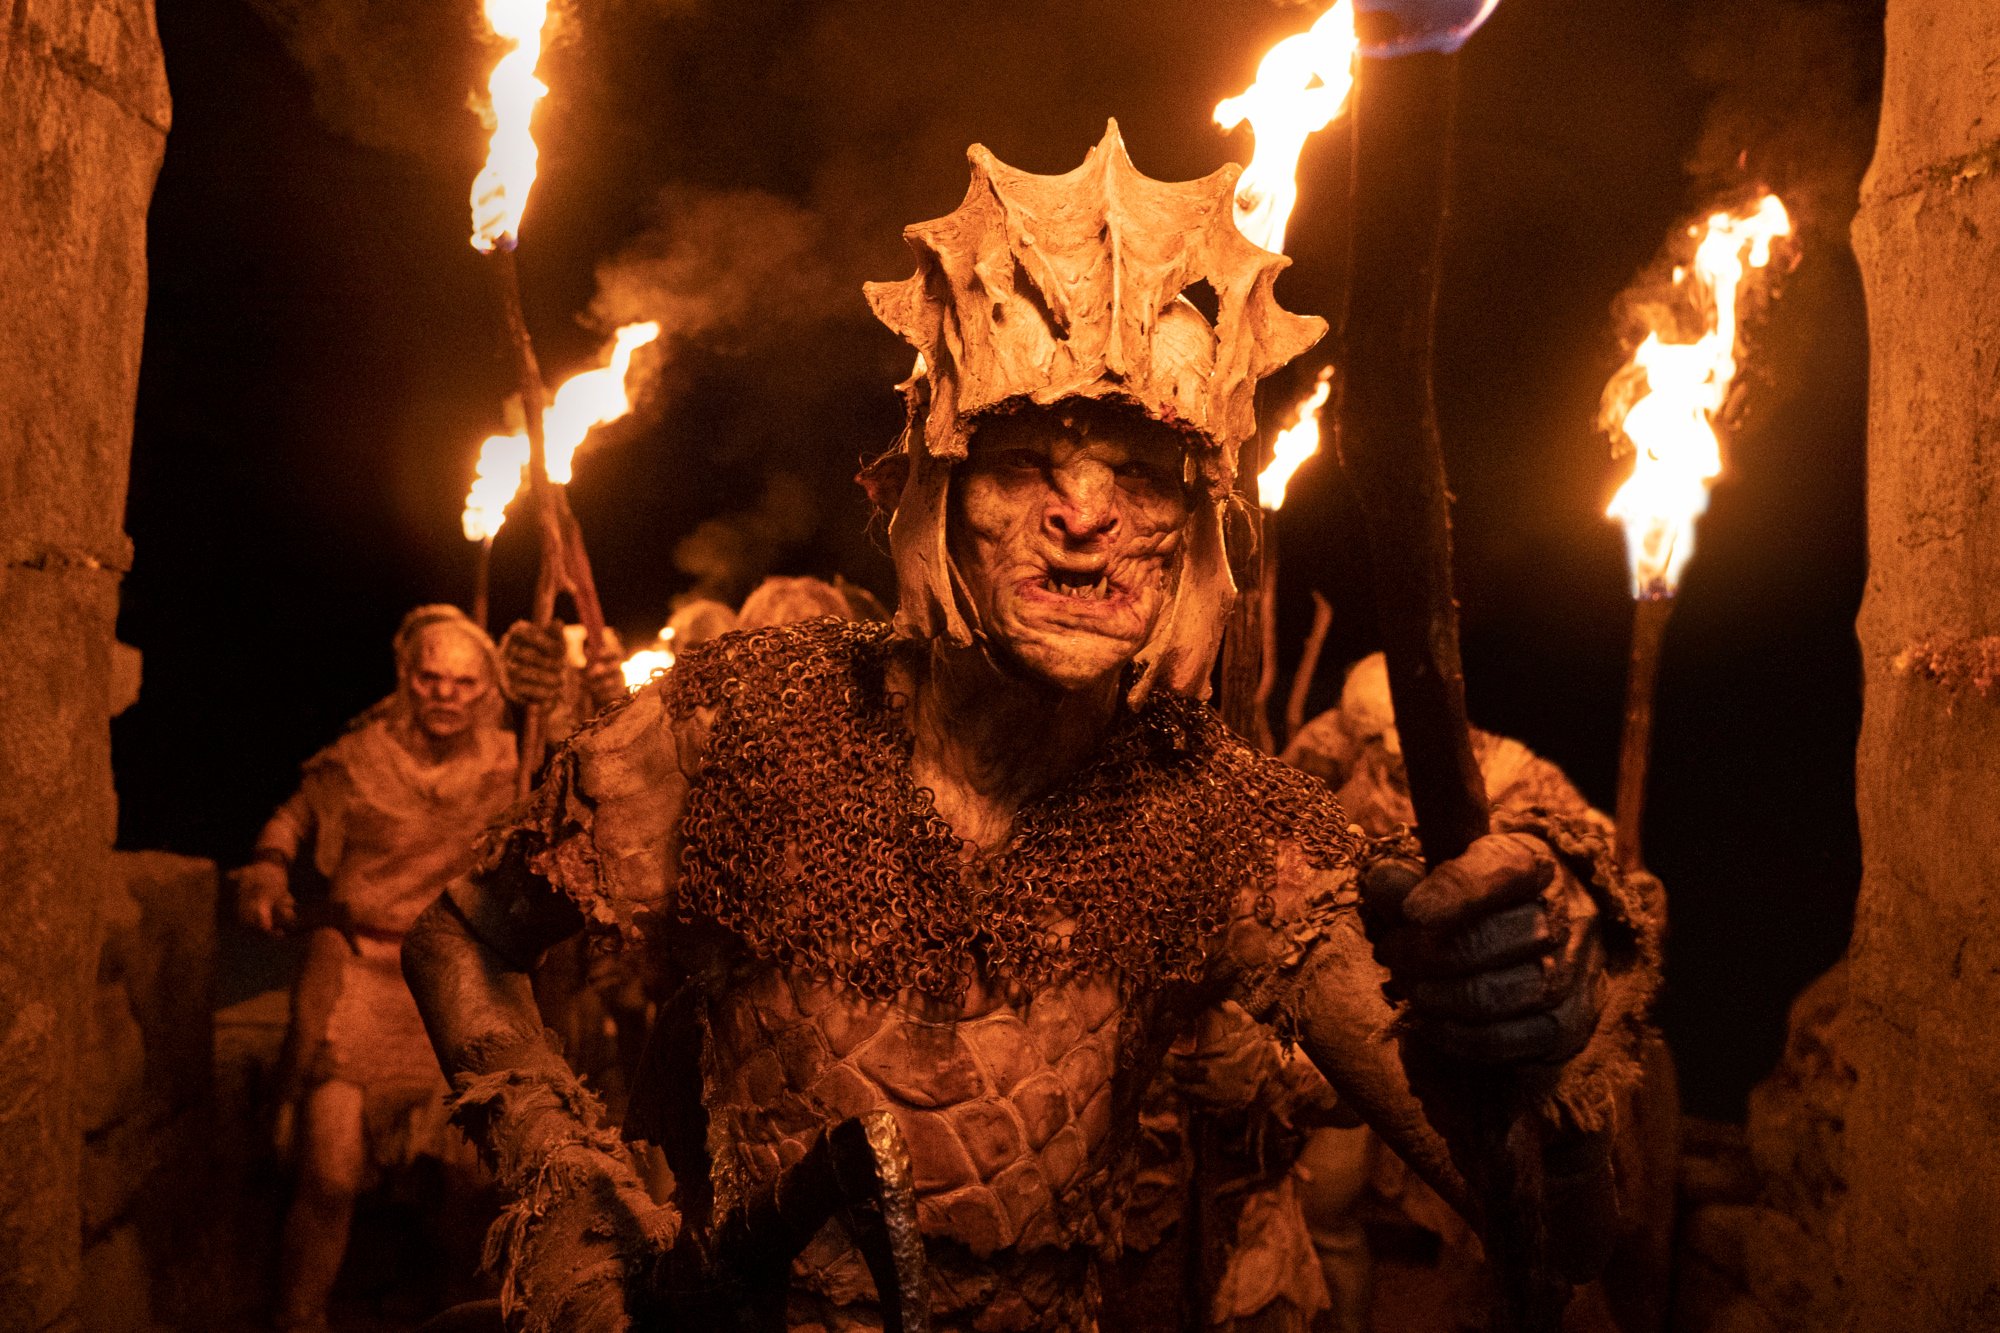 The Orcs following the orders of Adar in 'The Lord of the Rings: The Rings of Power.' They're holding torches and the leader is wearing a helmet.